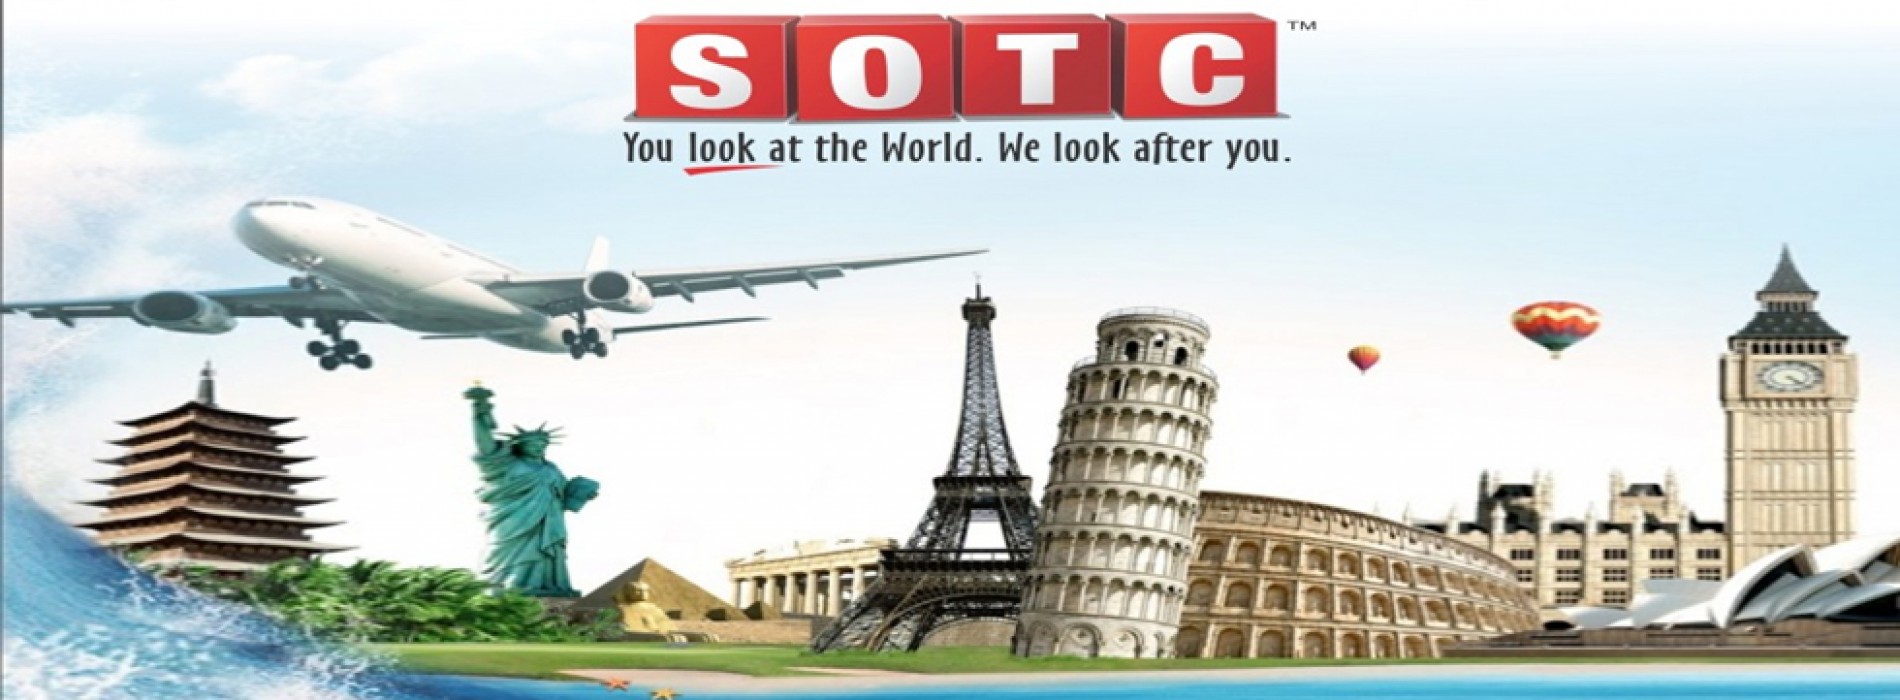 SOTC Travel introduces special monsoon travel packages across destinations